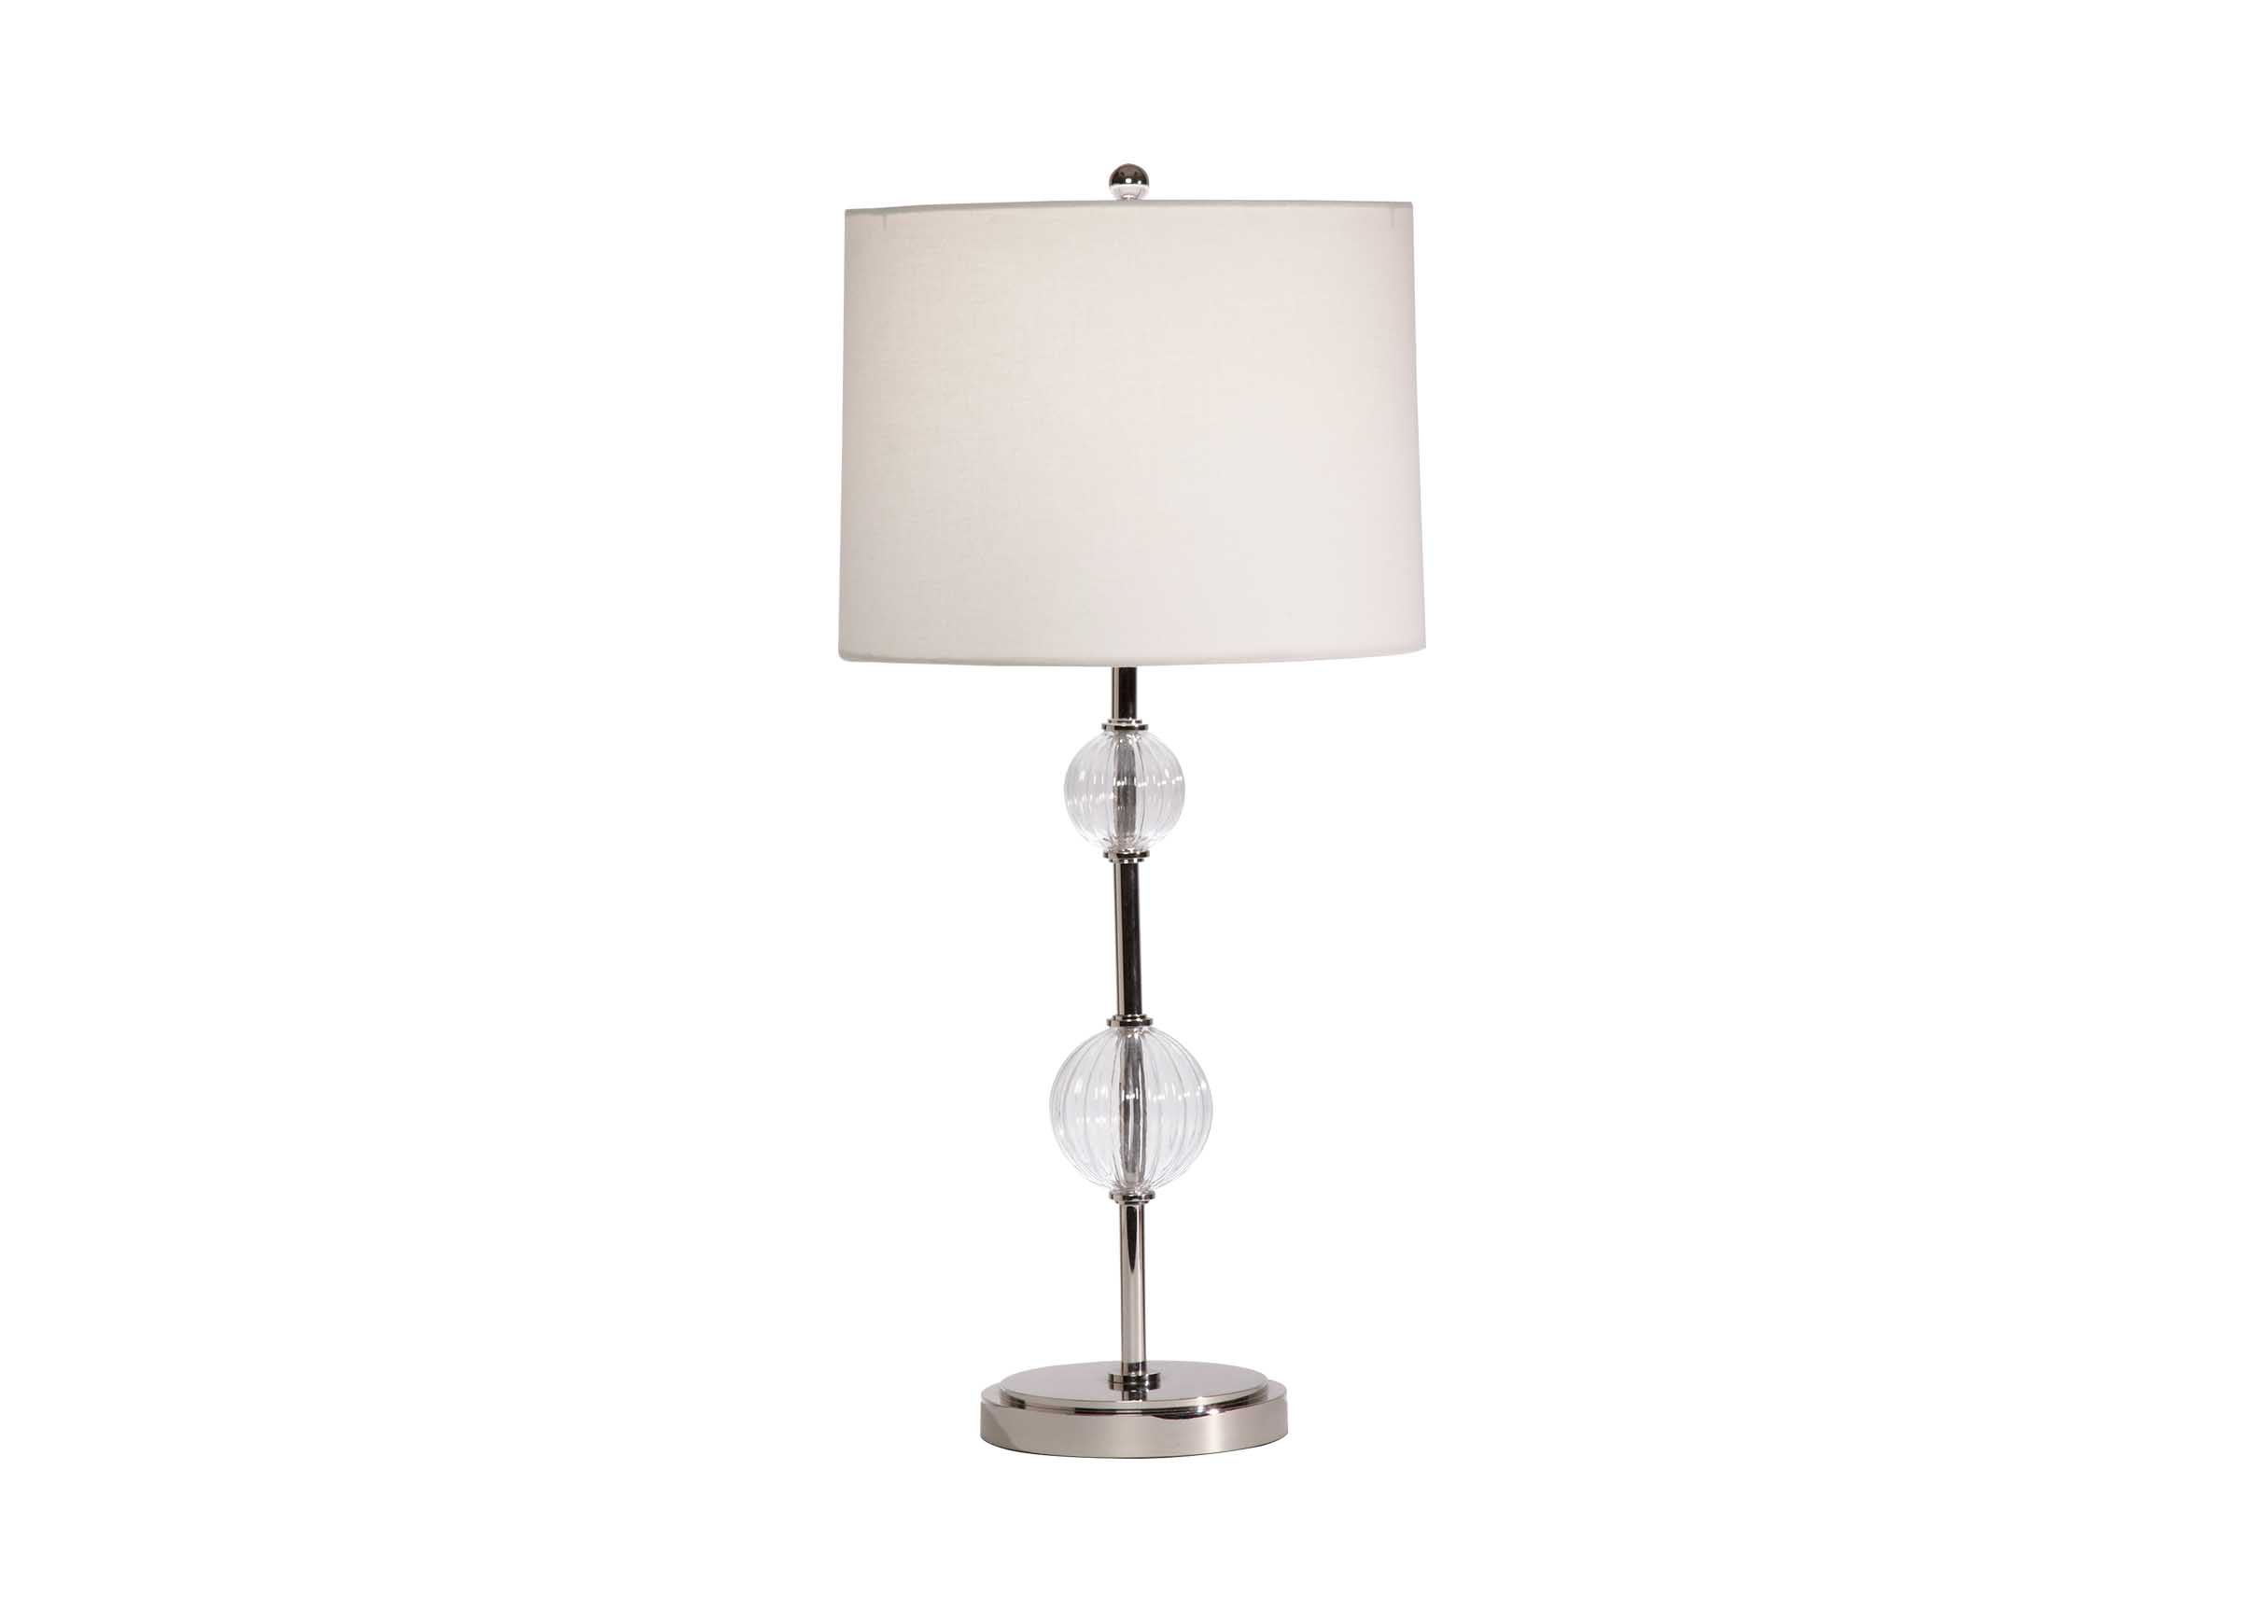 Ribbed Glass Ball Table Lamp | TABLE LAMPS | Ethan Allen